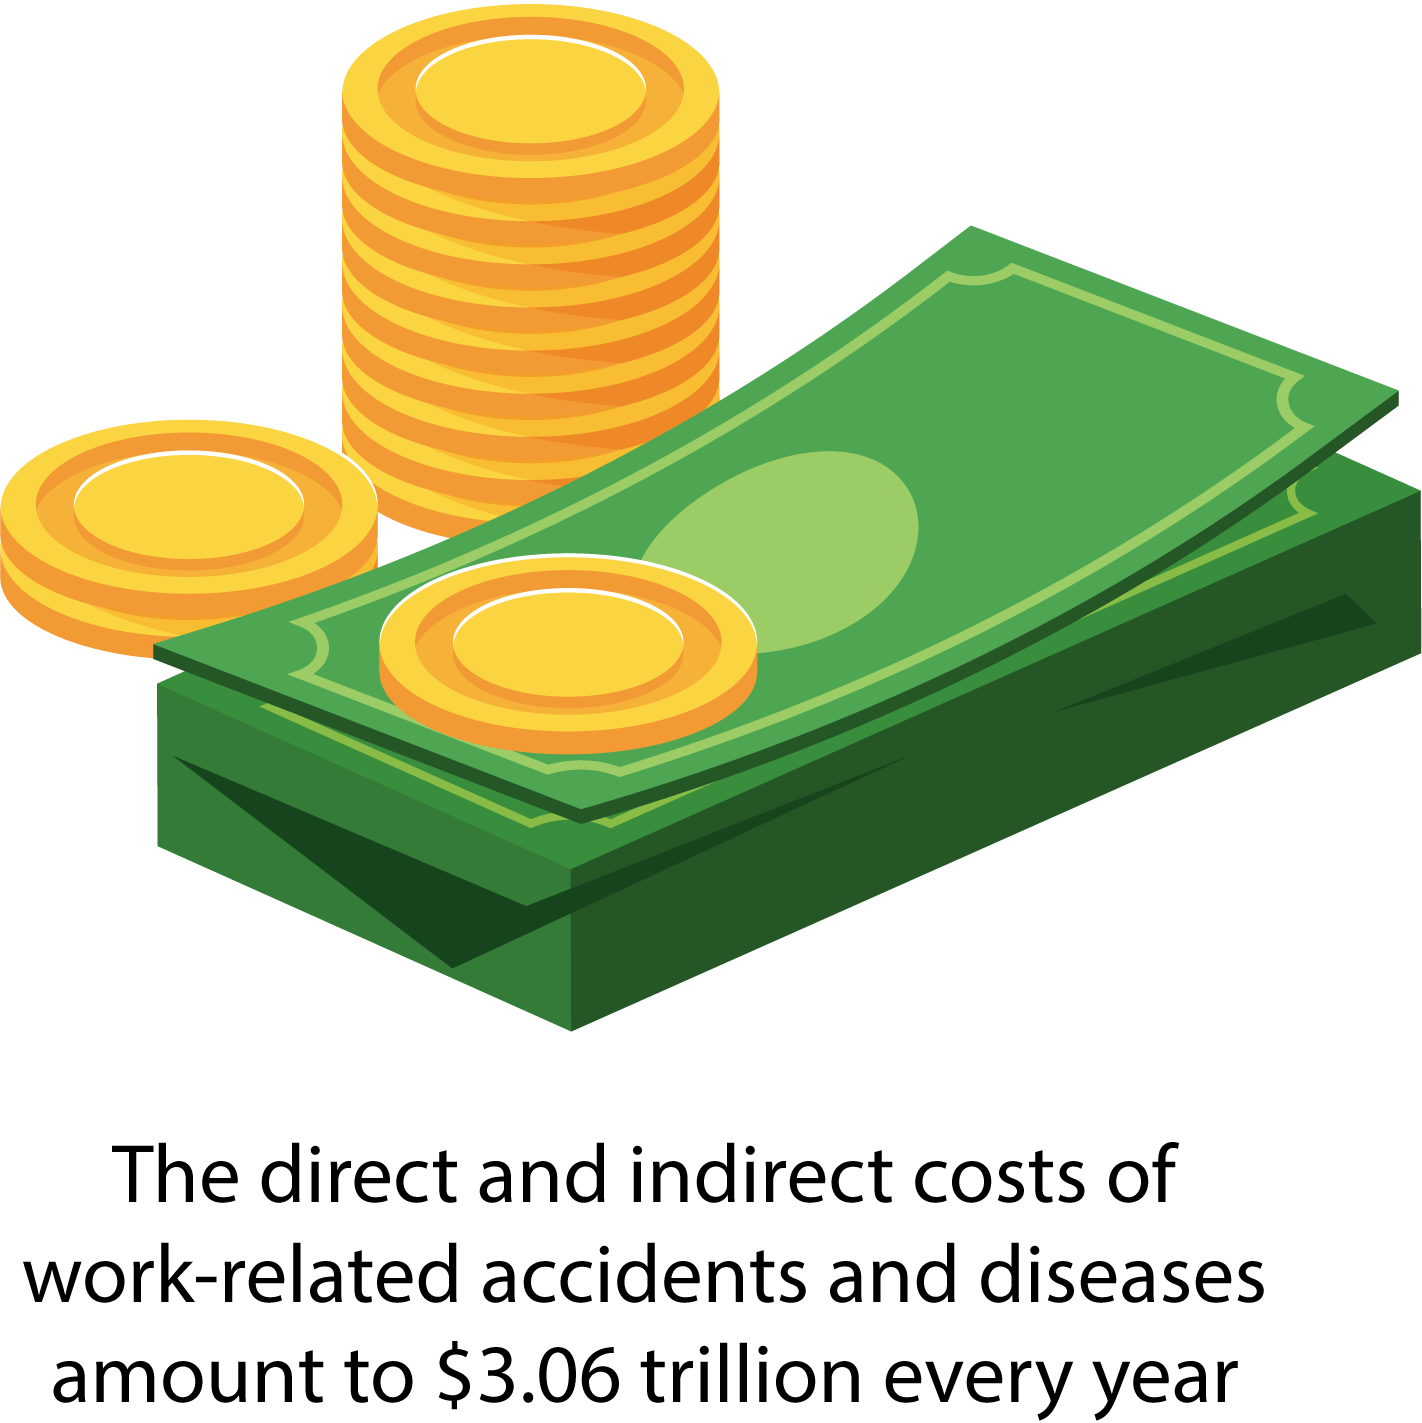 Image showing the direct and indirect costs of work-related accidents and diseases.